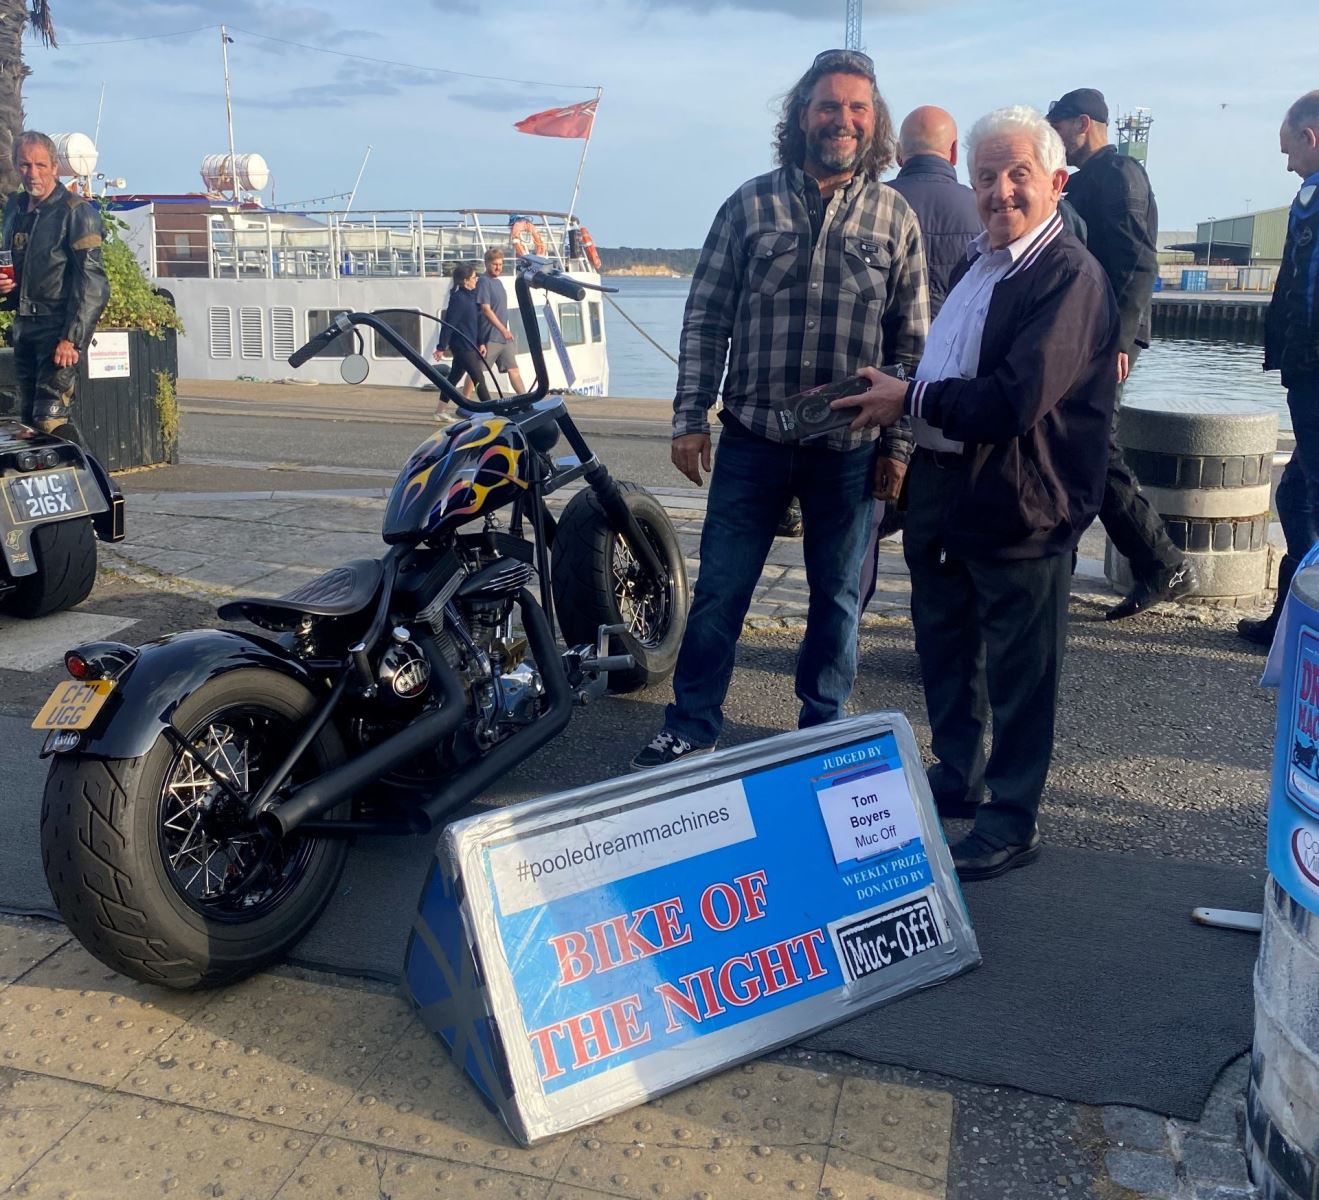 Two men smiling at camera after winning bike of the night in Poole